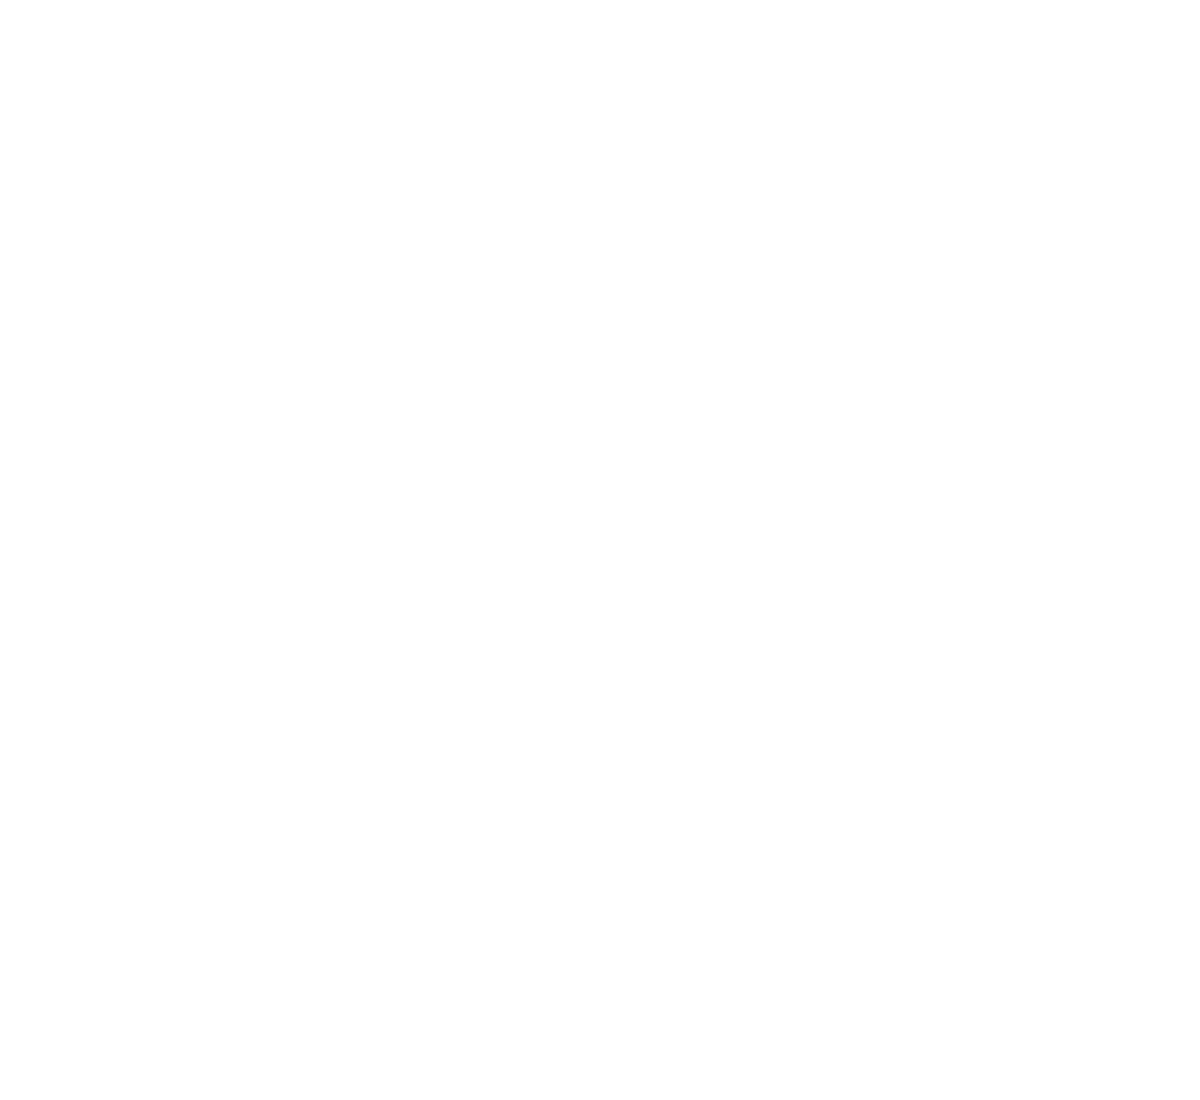 Passing by a talking journey